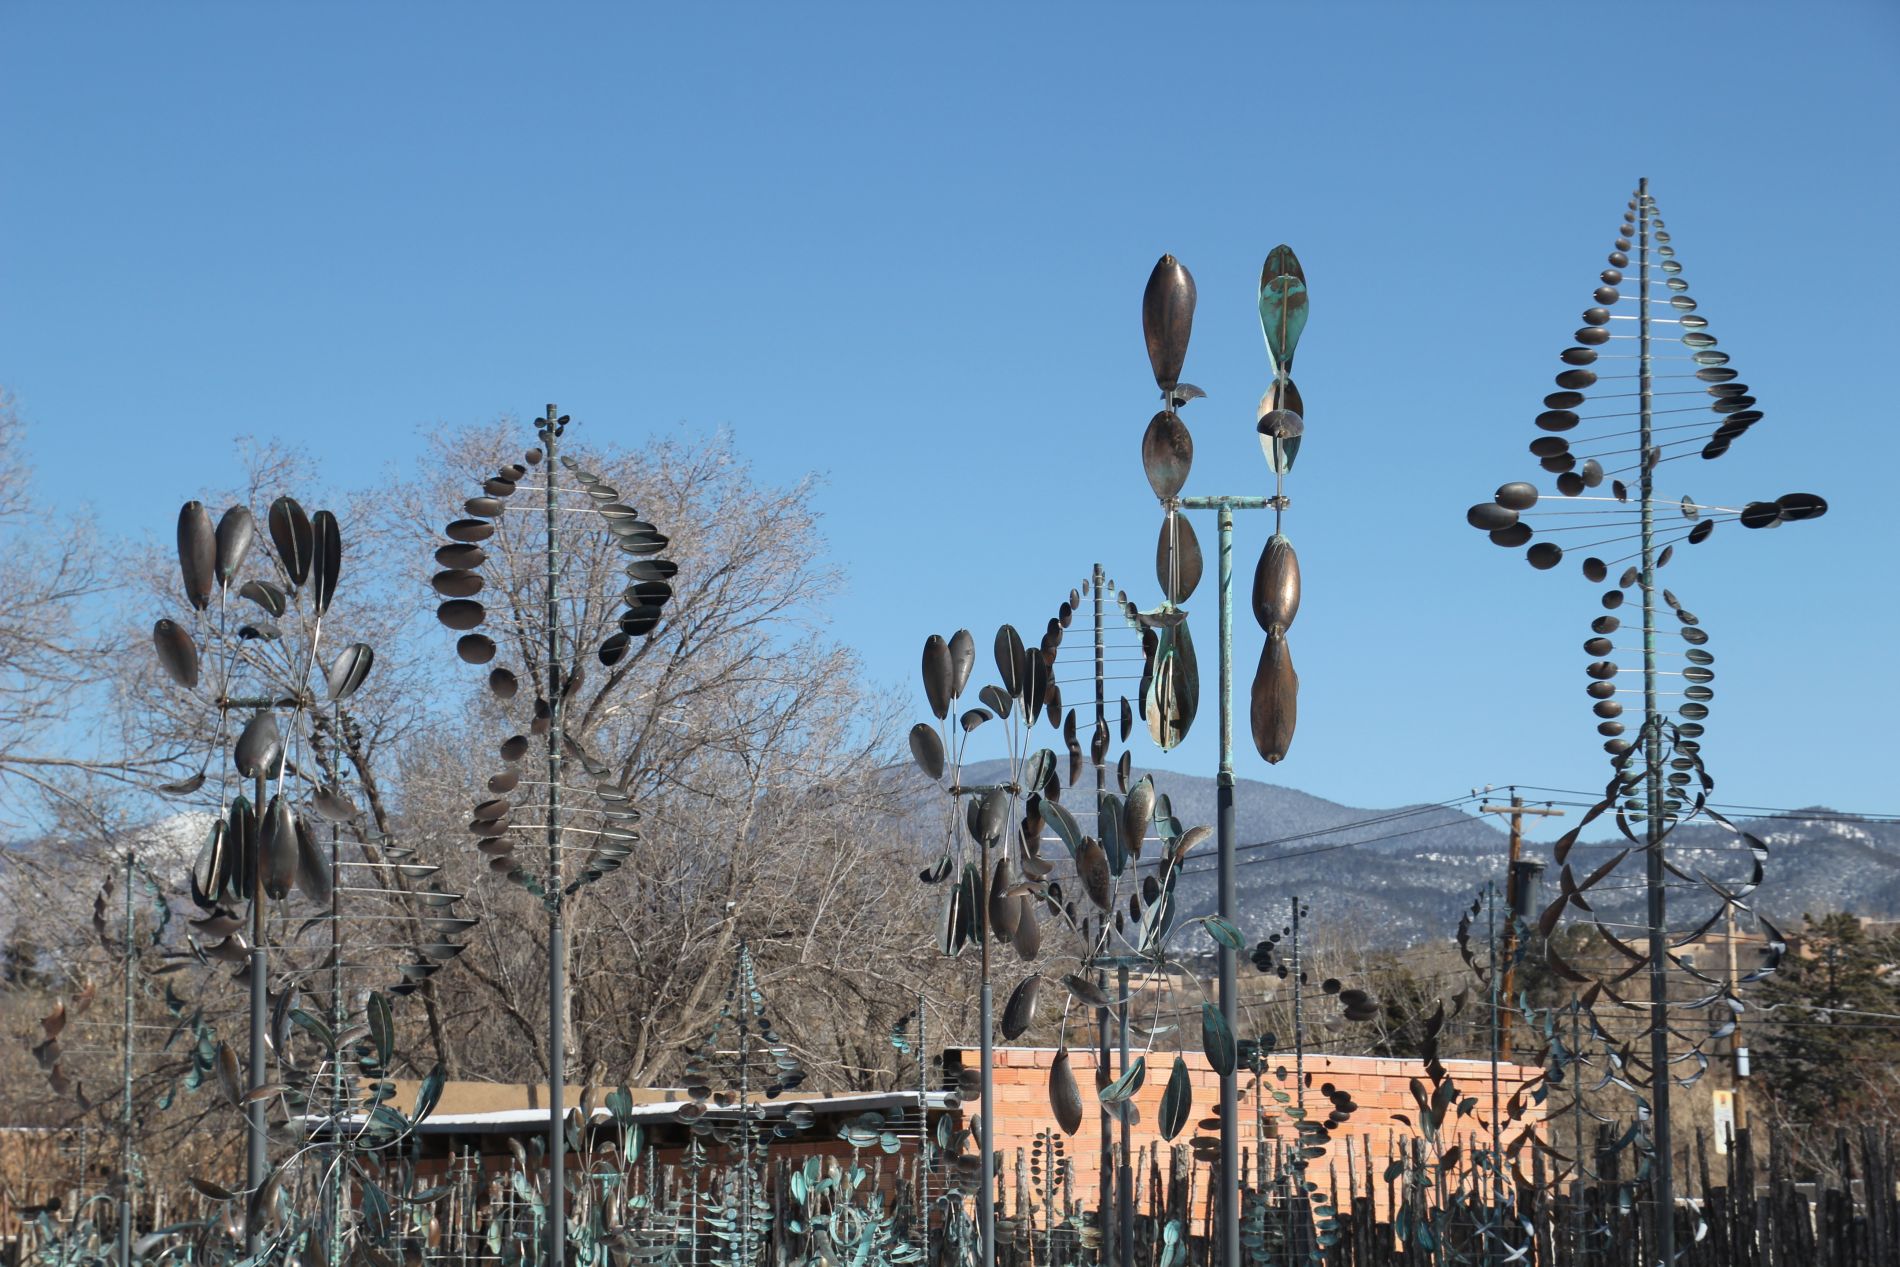 Wiford Gallery on Canyon Road in Santa Fe, New Mexico